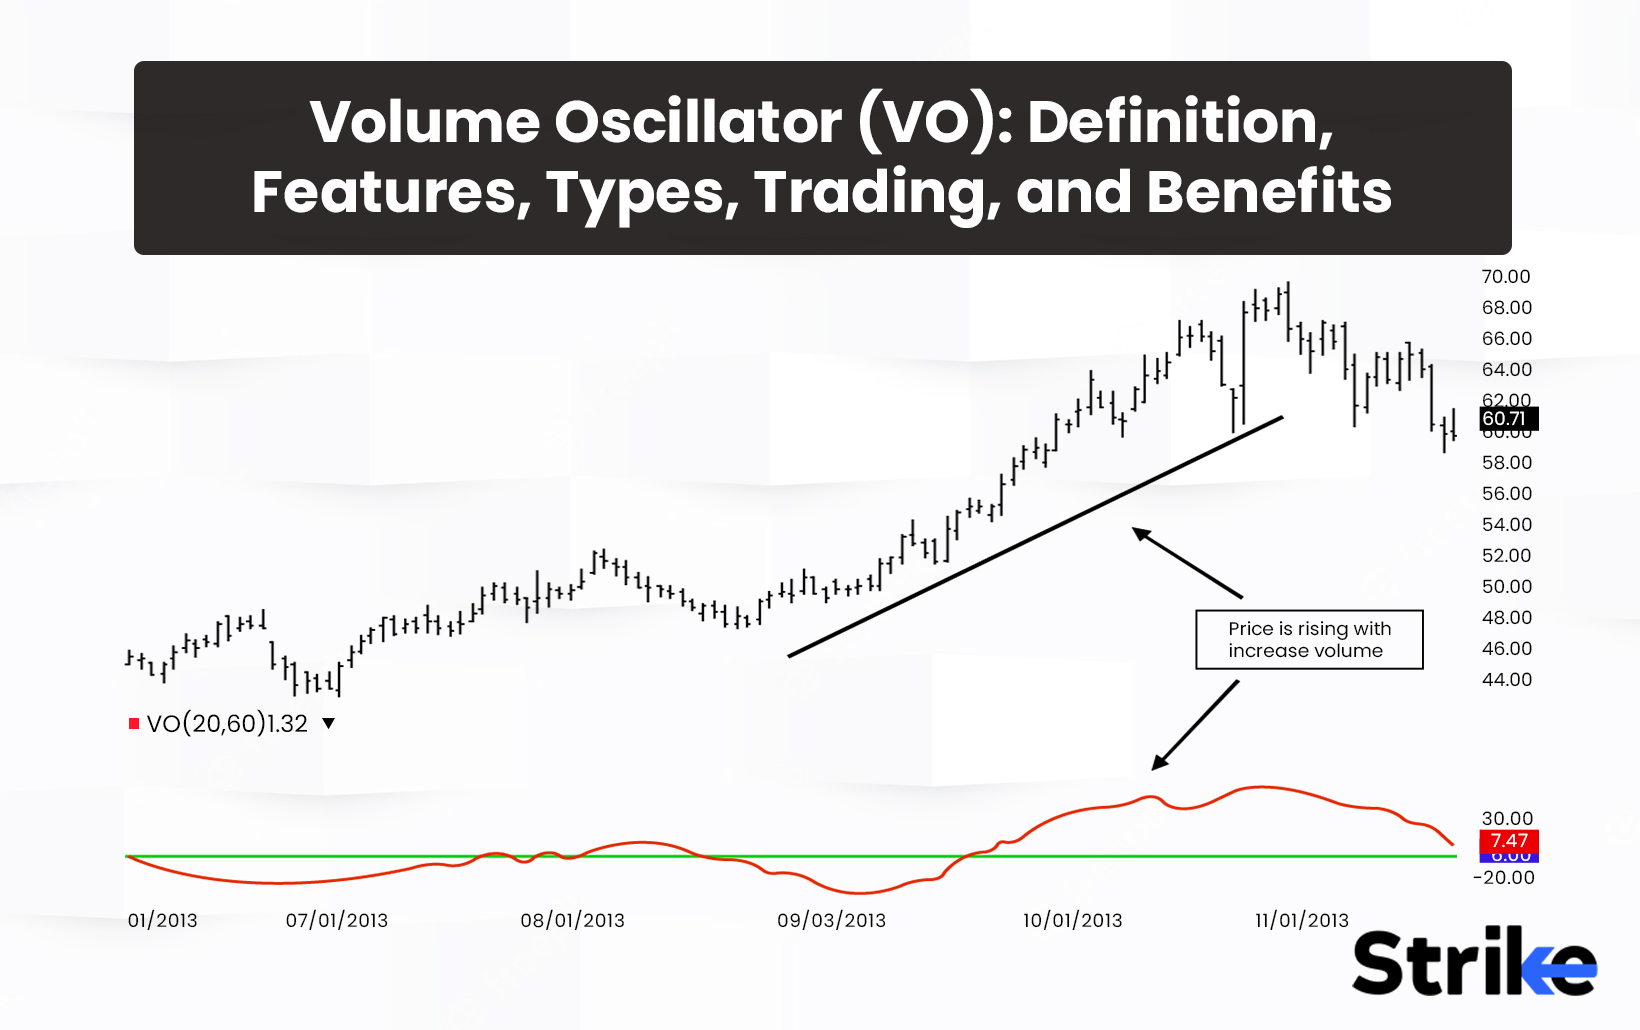 Volume Oscillator (VO): Definition, Features, Types, Trading, and Benefits